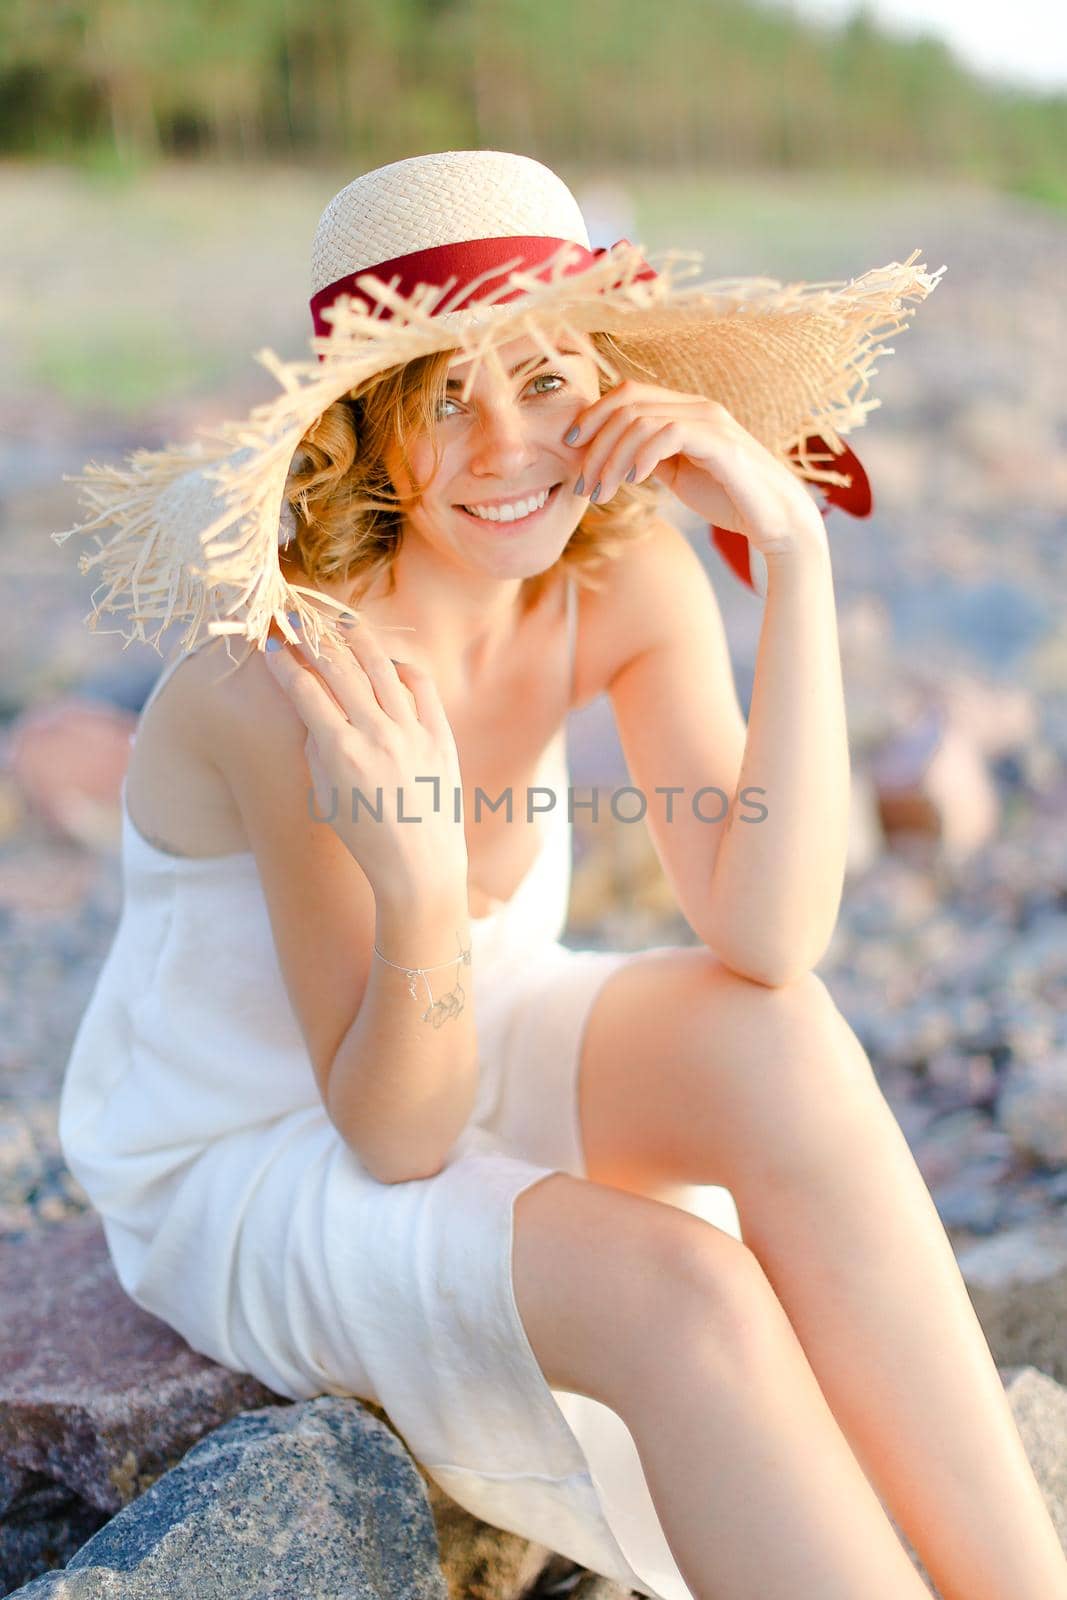 Caucasian nice girl in hat sitting on shingle beach. Concept of summer vacations and beauty.